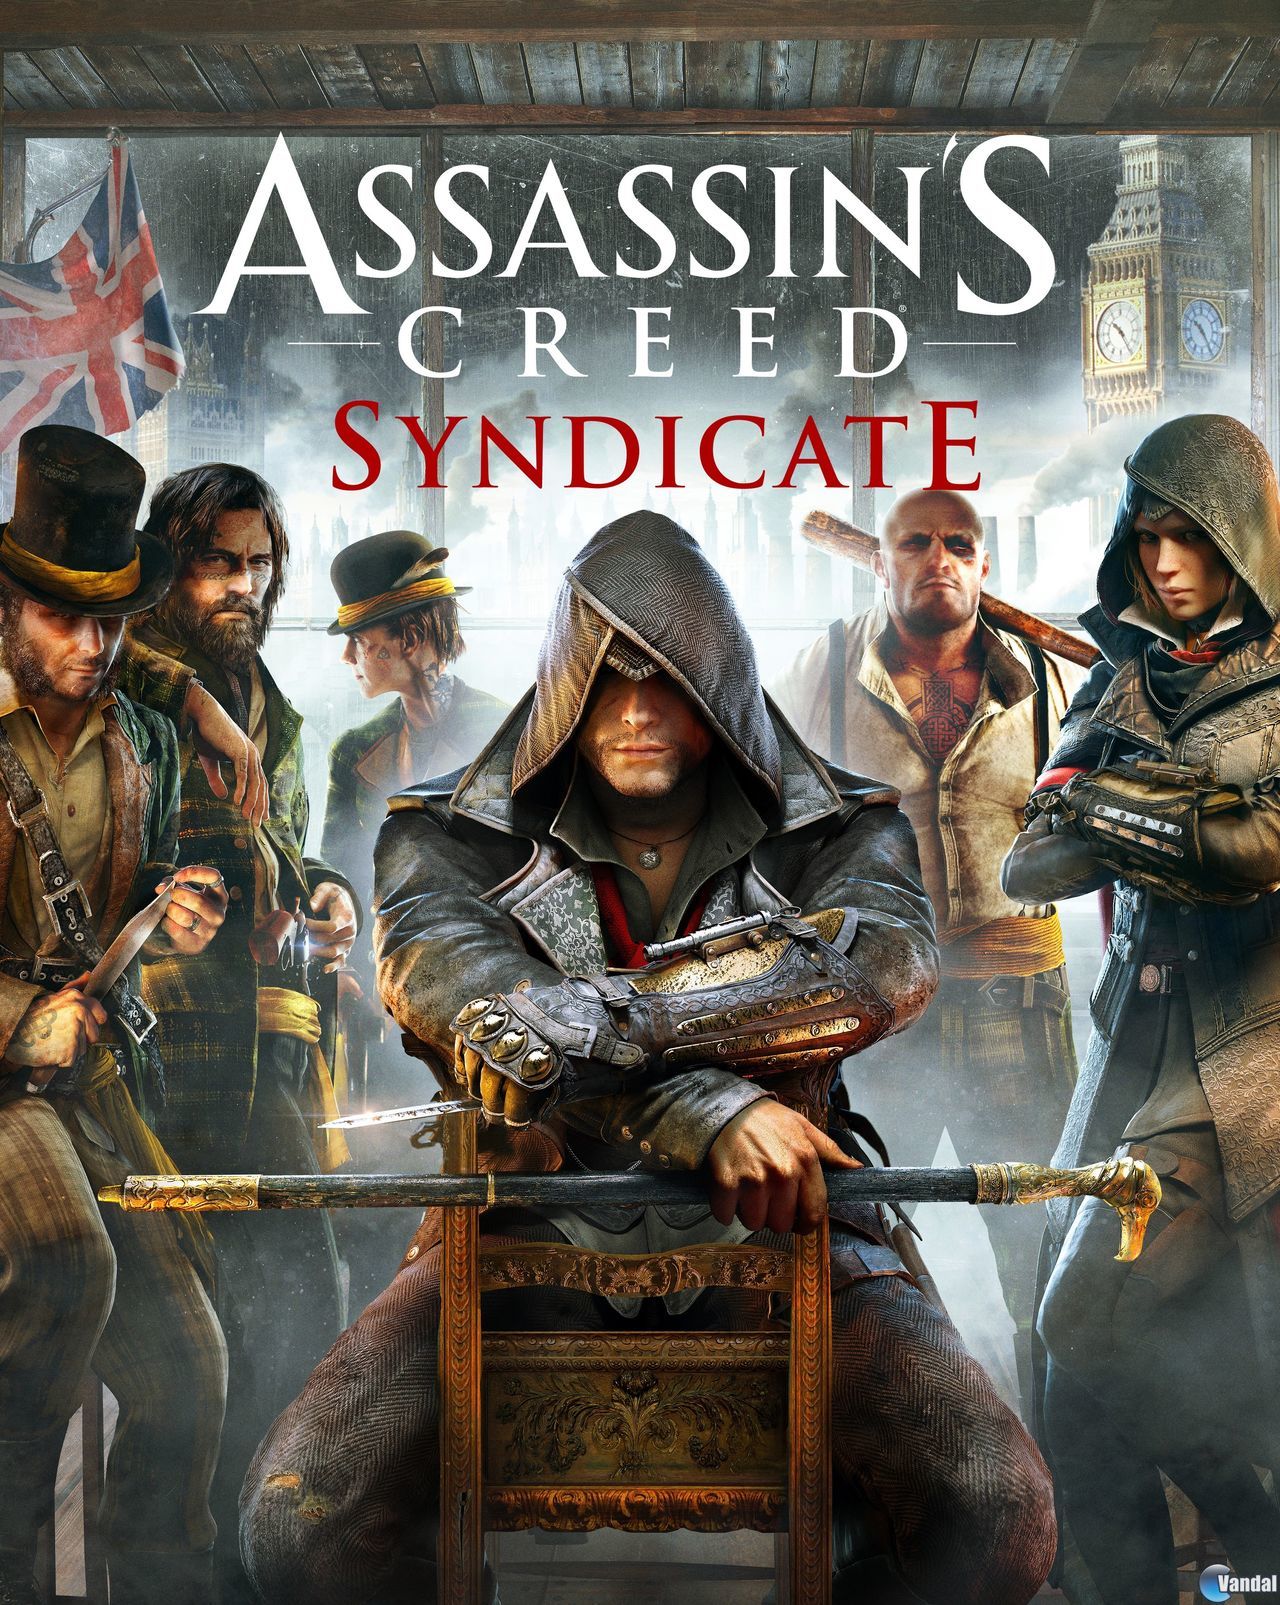 Assassin's Creed Syndicate - Videojuego (PS4, Xbox One y PC) - Vandal